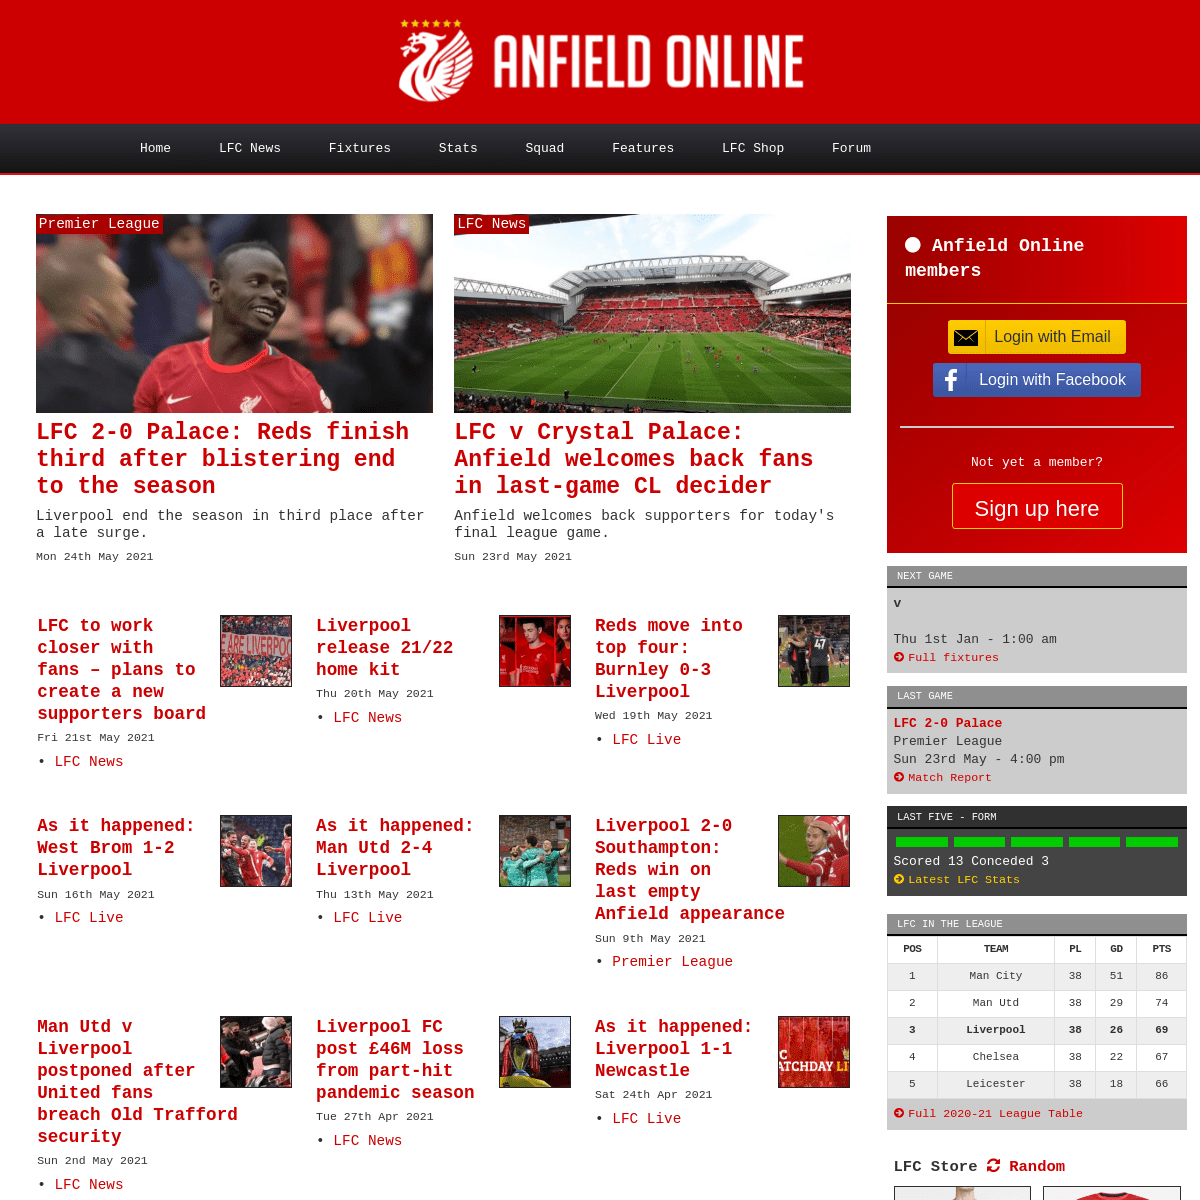 A complete backup of https://anfield-online.co.uk